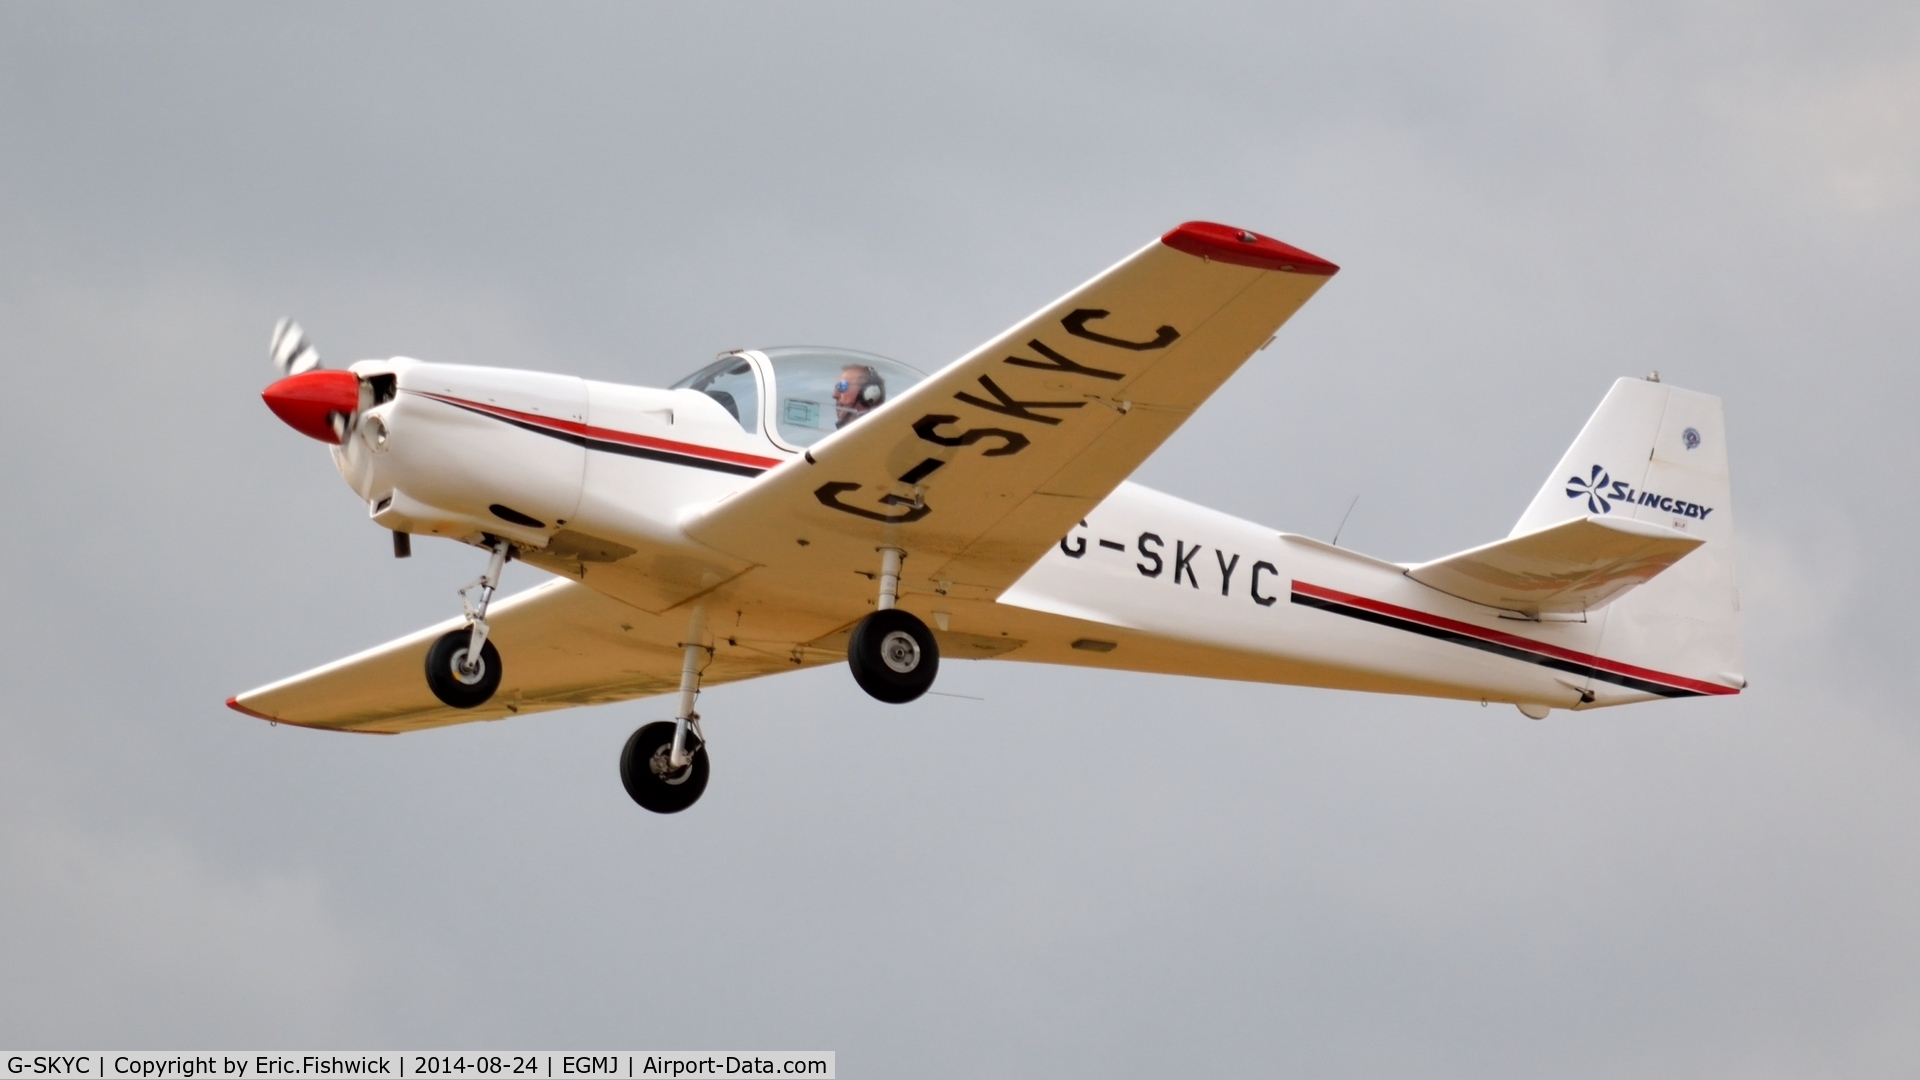 G-SKYC, 1984 Slingsby T-67M Firefly C/N 2009, 43. G-SKYC in display mode at a superb Little Gransden Air & Car Show, Aug. 2014.